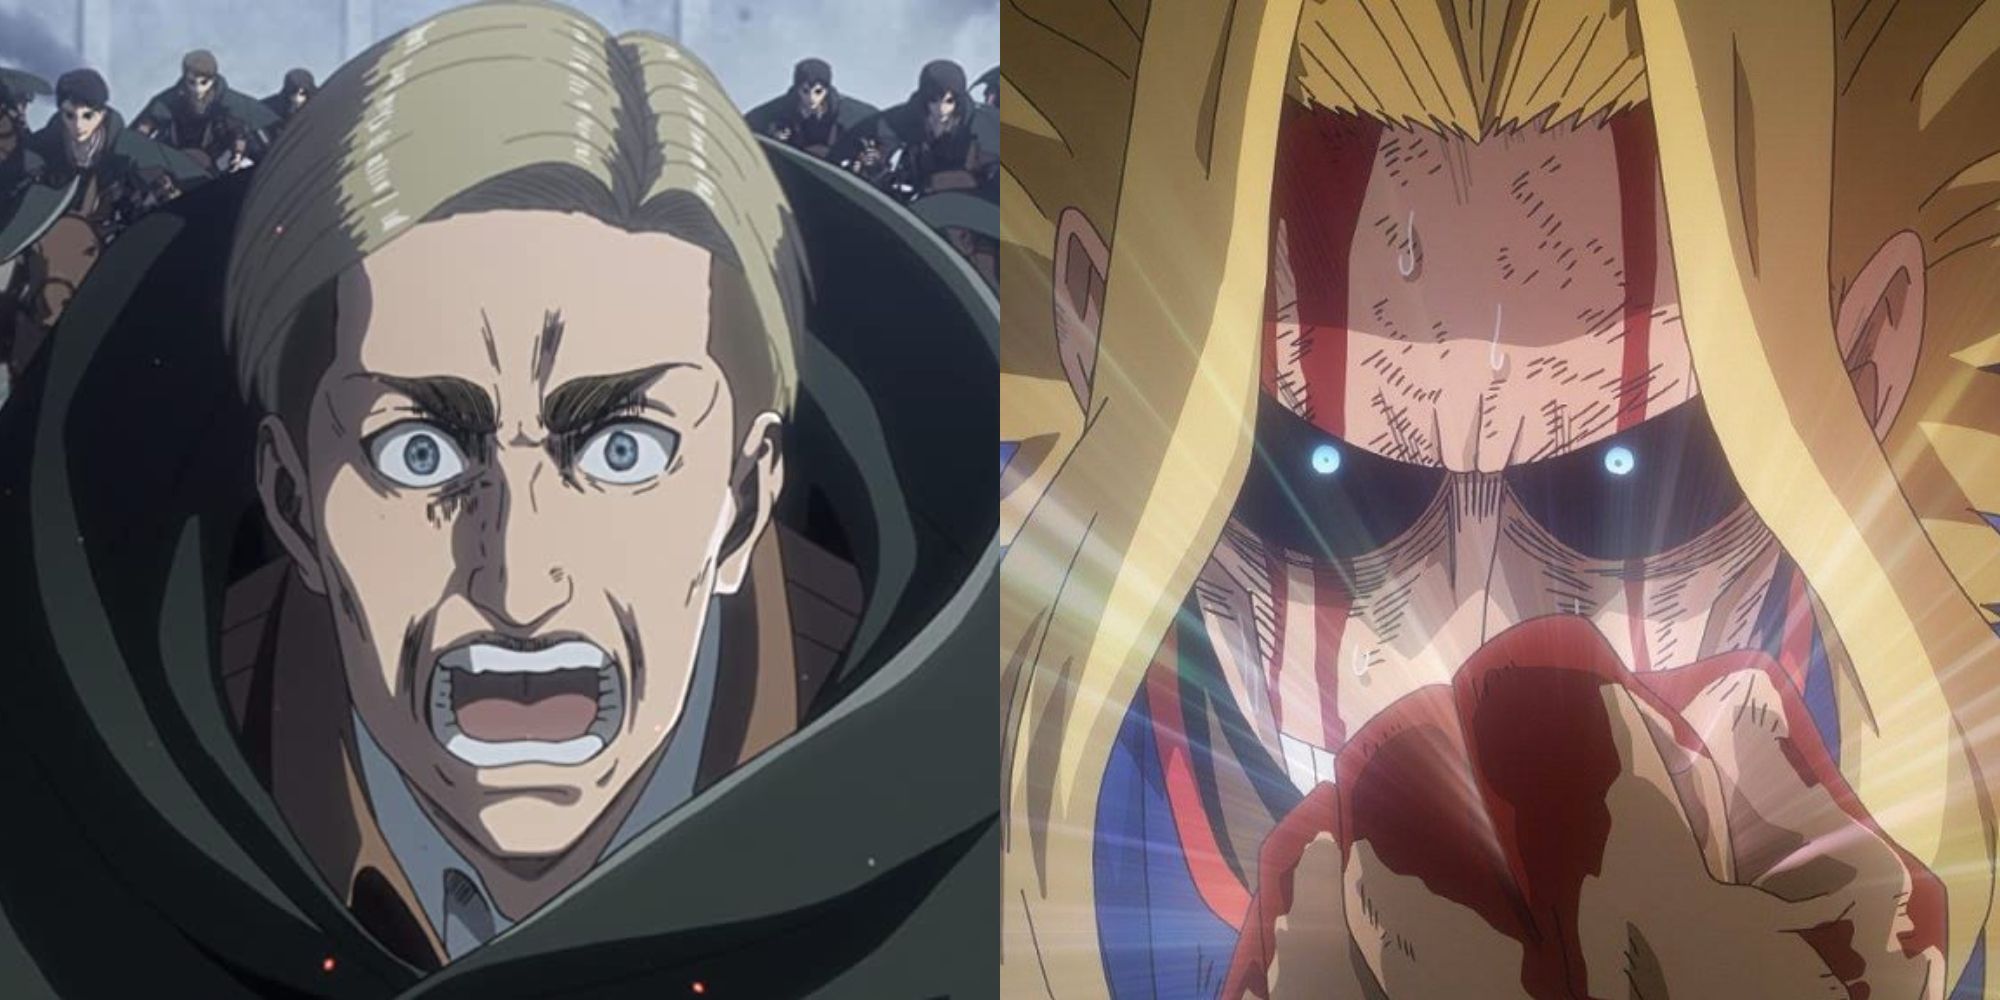 Split image showing Erwin in Attack on Titan and All Might in My Hero Academia.